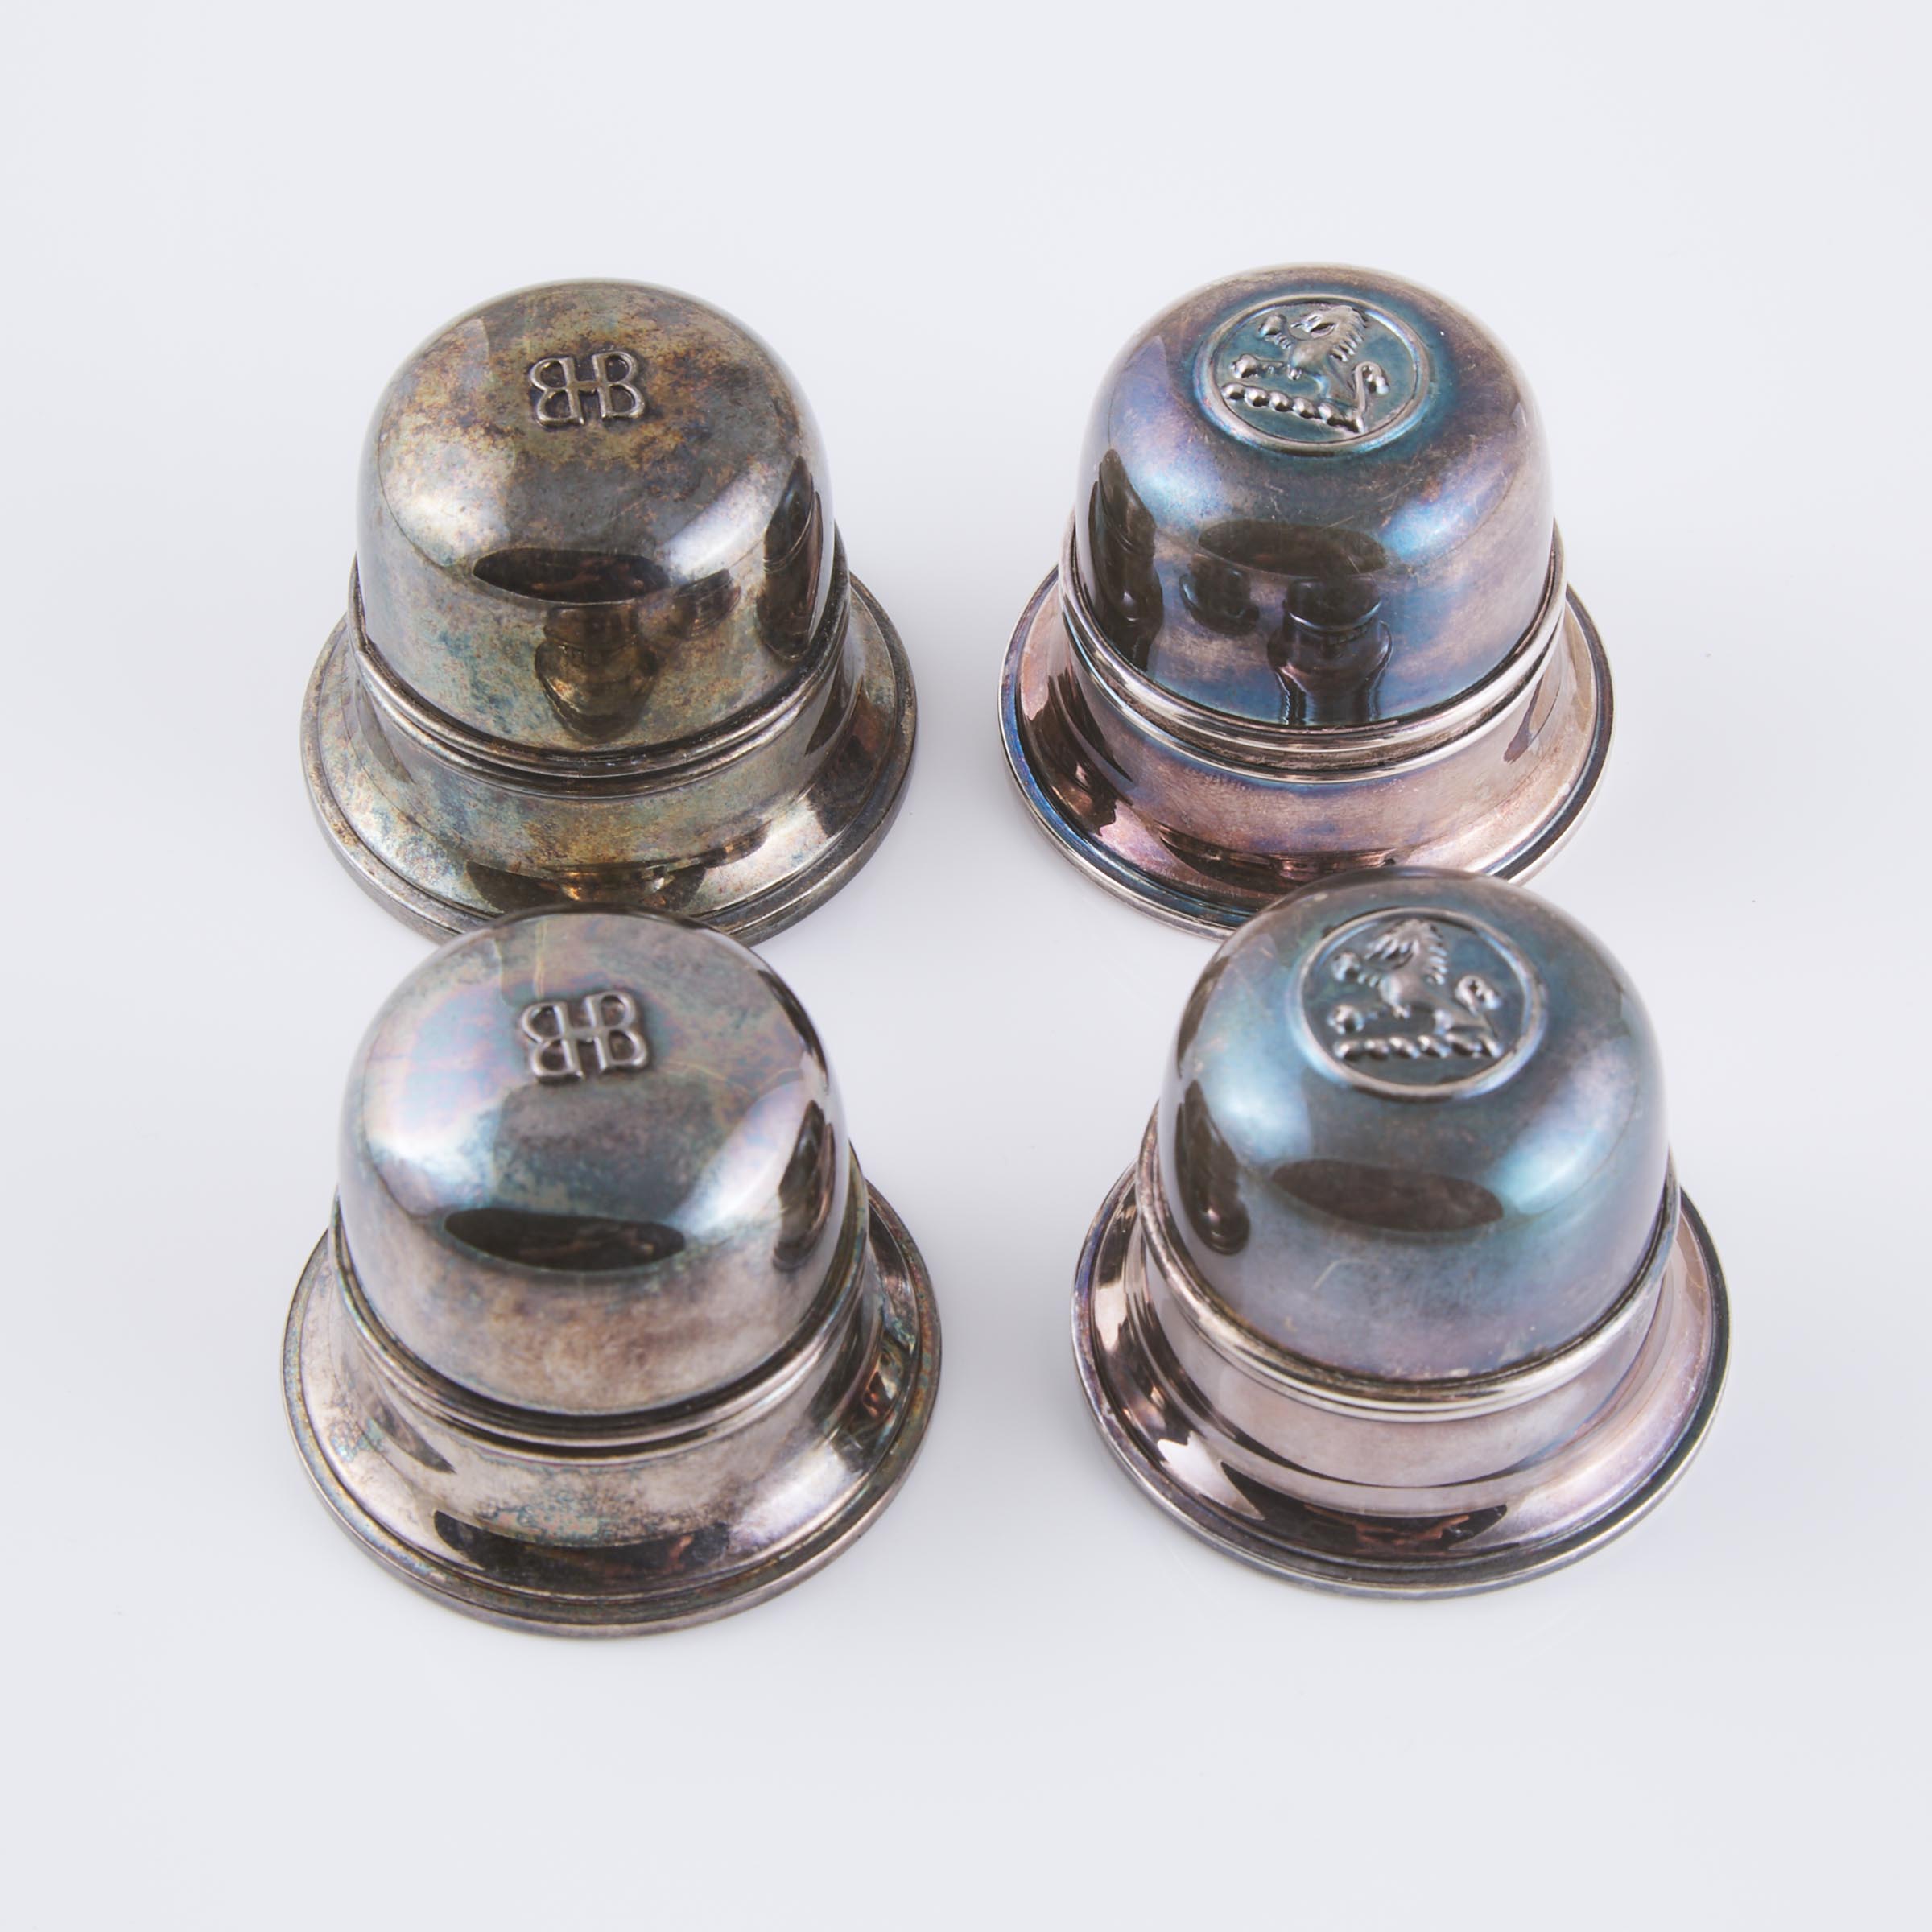 4 Birks Silverplated Ring Boxes